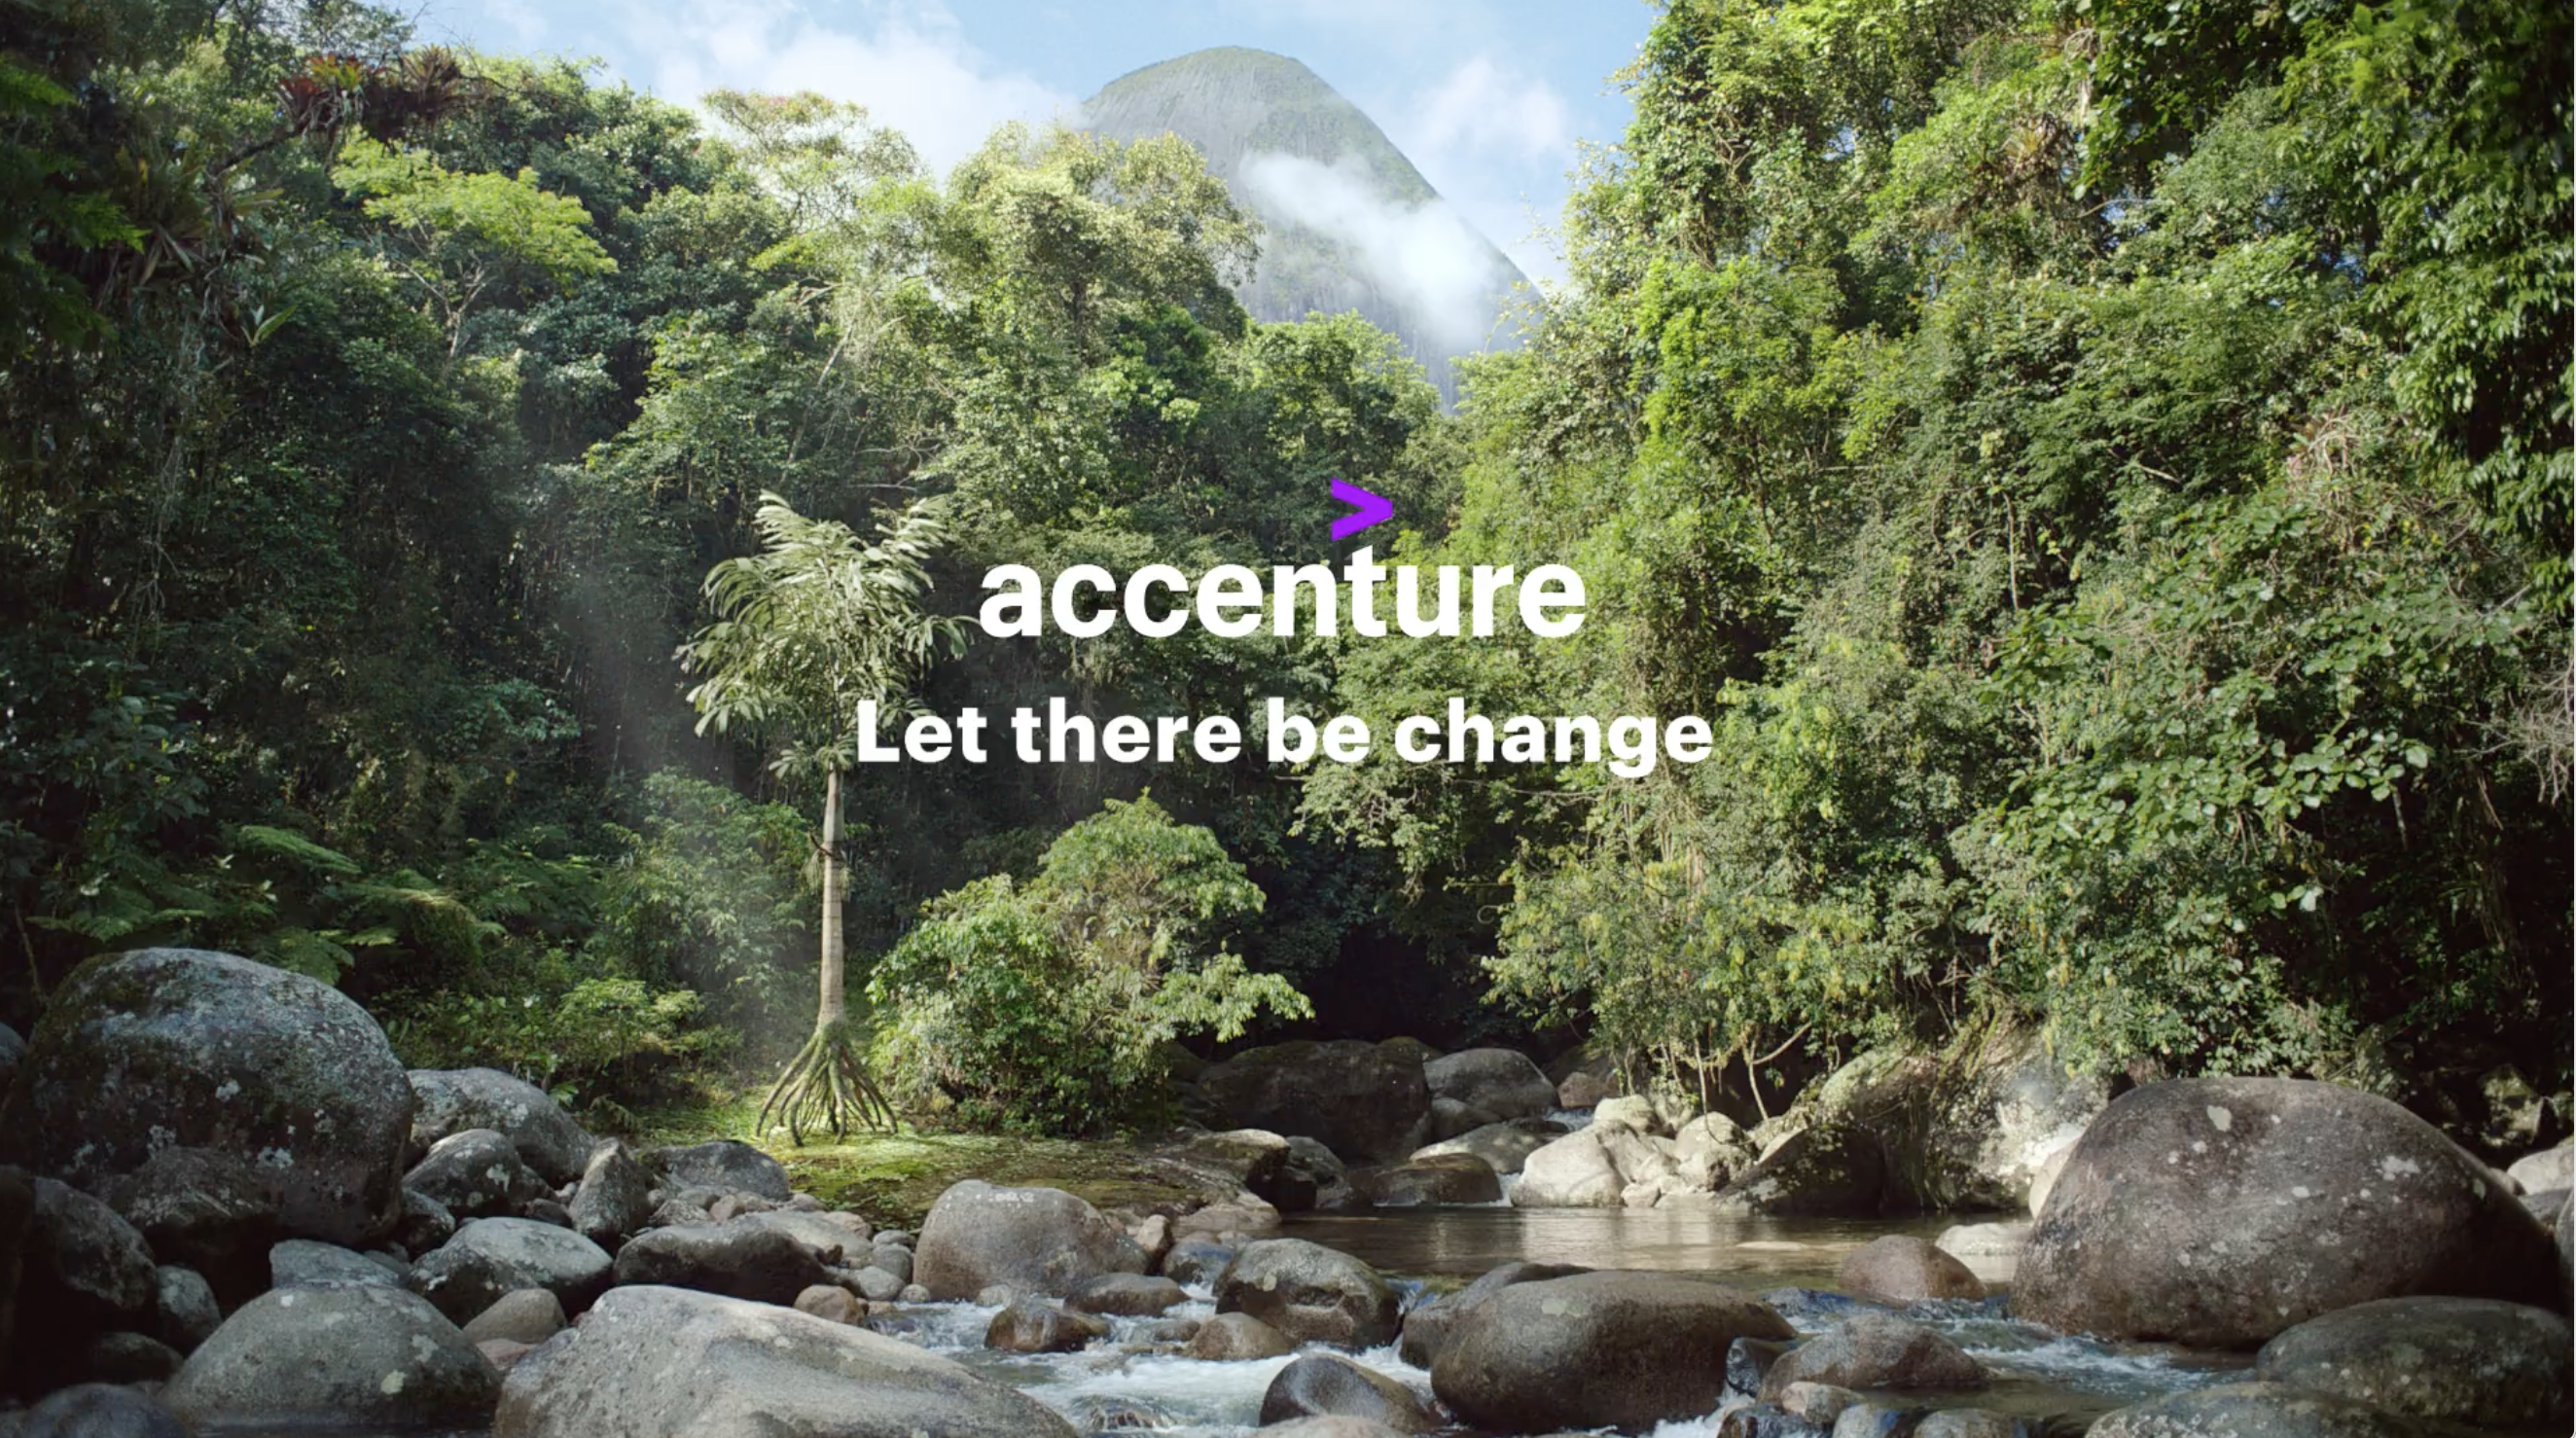 Accenture – The Changing Tree